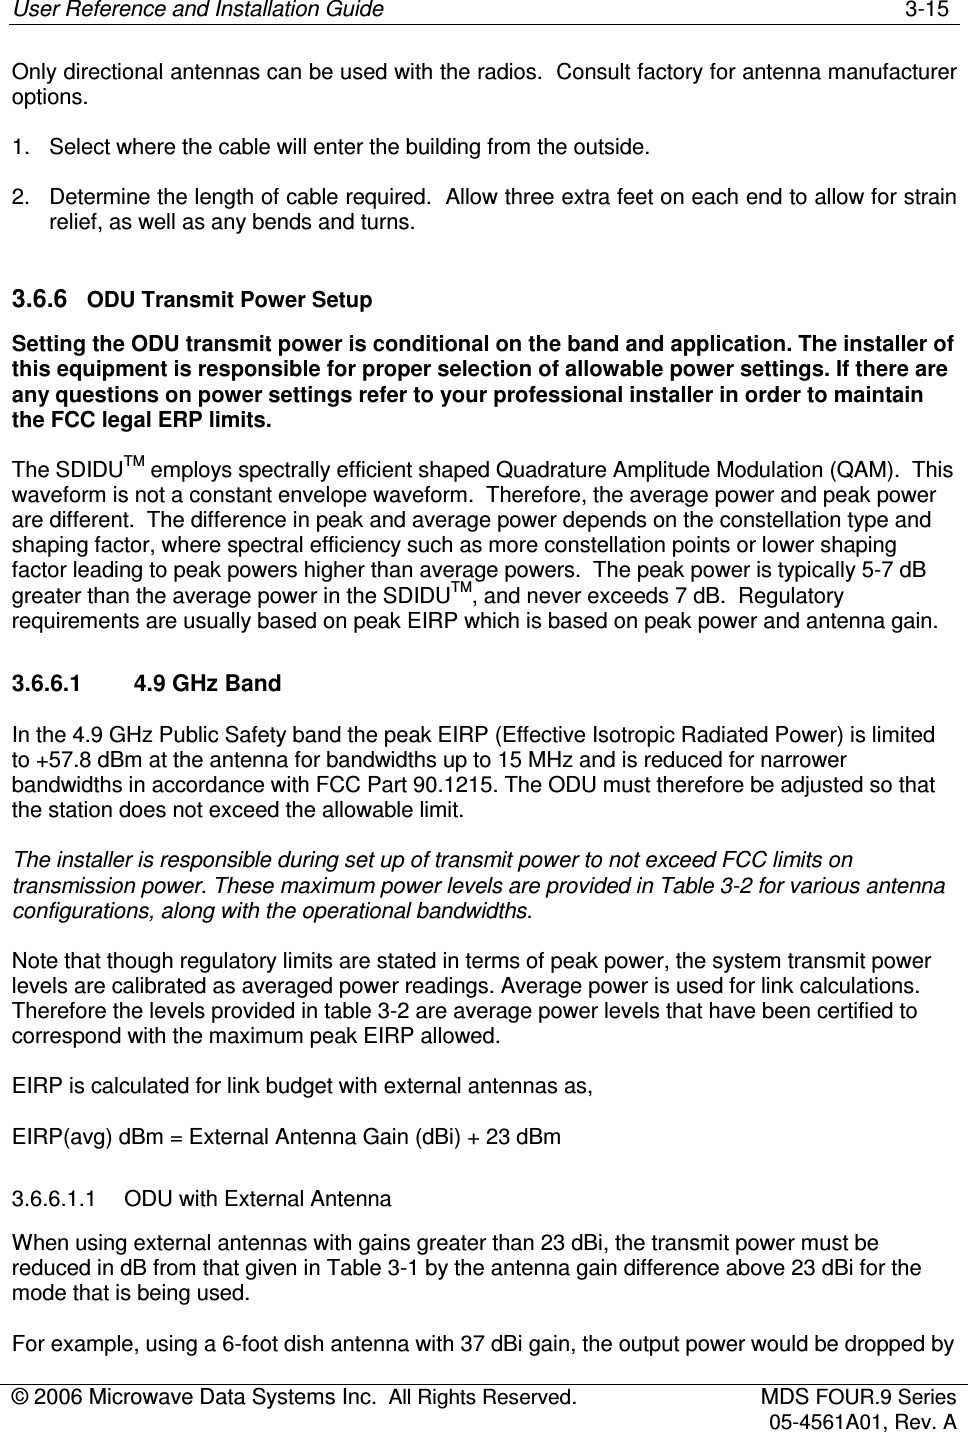 User Reference and Installation Guide    3-15 © 2006 Microwave Data Systems Inc.  All Rights Reserved.  MDS FOUR.9 Series 05-4561A01, Rev. A  Only directional antennas can be used with the radios.  Consult factory for antenna manufacturer options. 1.  Select where the cable will enter the building from the outside. 2.  Determine the length of cable required.  Allow three extra feet on each end to allow for strain relief, as well as any bends and turns. 3.6.6  ODU Transmit Power Setup Setting the ODU transmit power is conditional on the band and application. The installer of this equipment is responsible for proper selection of allowable power settings. If there are any questions on power settings refer to your professional installer in order to maintain the FCC legal ERP limits. The SDIDUTM employs spectrally efficient shaped Quadrature Amplitude Modulation (QAM).  This waveform is not a constant envelope waveform.  Therefore, the average power and peak power are different.  The difference in peak and average power depends on the constellation type and shaping factor, where spectral efficiency such as more constellation points or lower shaping factor leading to peak powers higher than average powers.  The peak power is typically 5-7 dB greater than the average power in the SDIDUTM, and never exceeds 7 dB.  Regulatory requirements are usually based on peak EIRP which is based on peak power and antenna gain. 3.6.6.1  4.9 GHz Band In the 4.9 GHz Public Safety band the peak EIRP (Effective Isotropic Radiated Power) is limited to +57.8 dBm at the antenna for bandwidths up to 15 MHz and is reduced for narrower bandwidths in accordance with FCC Part 90.1215. The ODU must therefore be adjusted so that the station does not exceed the allowable limit. The installer is responsible during set up of transmit power to not exceed FCC limits on transmission power. These maximum power levels are provided in Table 3-2 for various antenna configurations, along with the operational bandwidths.  Note that though regulatory limits are stated in terms of peak power, the system transmit power levels are calibrated as averaged power readings. Average power is used for link calculations. Therefore the levels provided in table 3-2 are average power levels that have been certified to correspond with the maximum peak EIRP allowed. EIRP is calculated for link budget with external antennas as,  EIRP(avg) dBm = External Antenna Gain (dBi) + 23 dBm 3.6.6.1.1  ODU with External Antenna  When using external antennas with gains greater than 23 dBi, the transmit power must be reduced in dB from that given in Table 3-1 by the antenna gain difference above 23 dBi for the mode that is being used. For example, using a 6-foot dish antenna with 37 dBi gain, the output power would be dropped by  